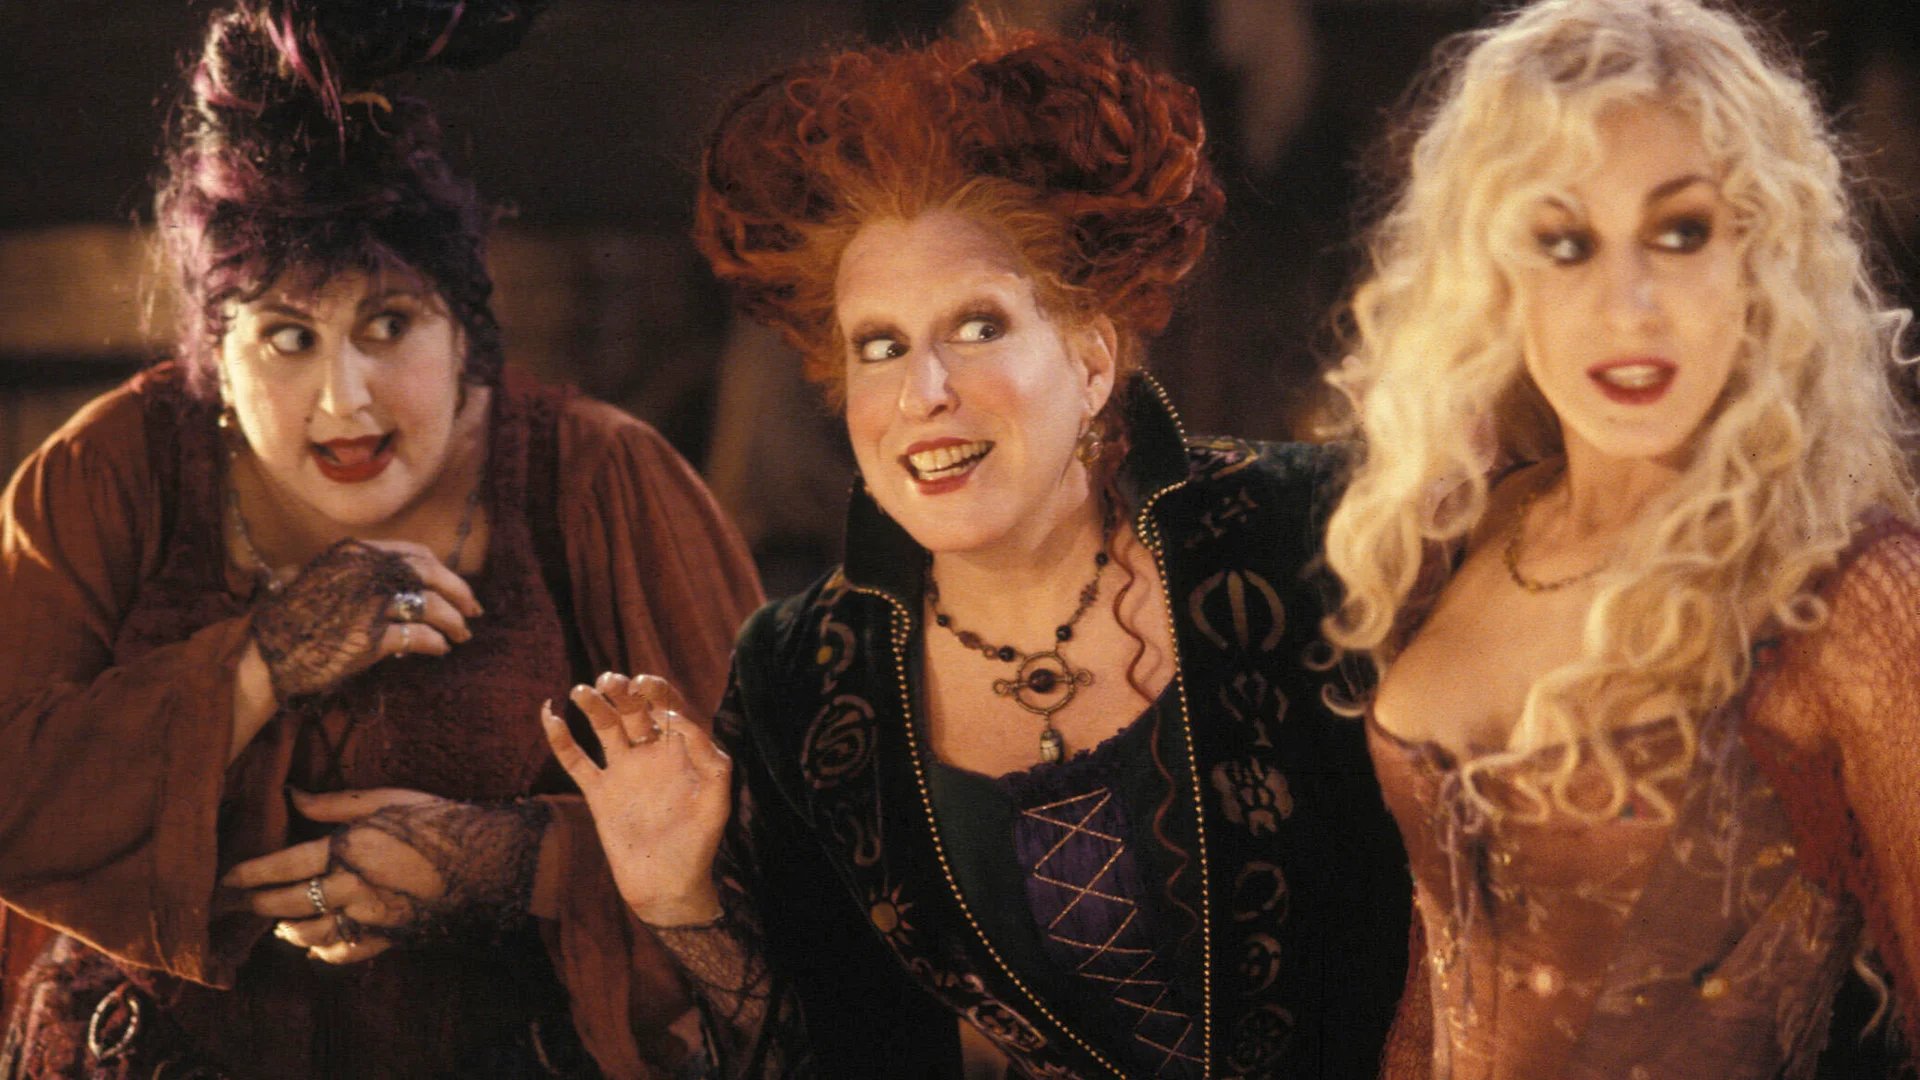 Hocus Pocus 2 Set Pics And Videos Reveal Witches In Costume Got This Covered